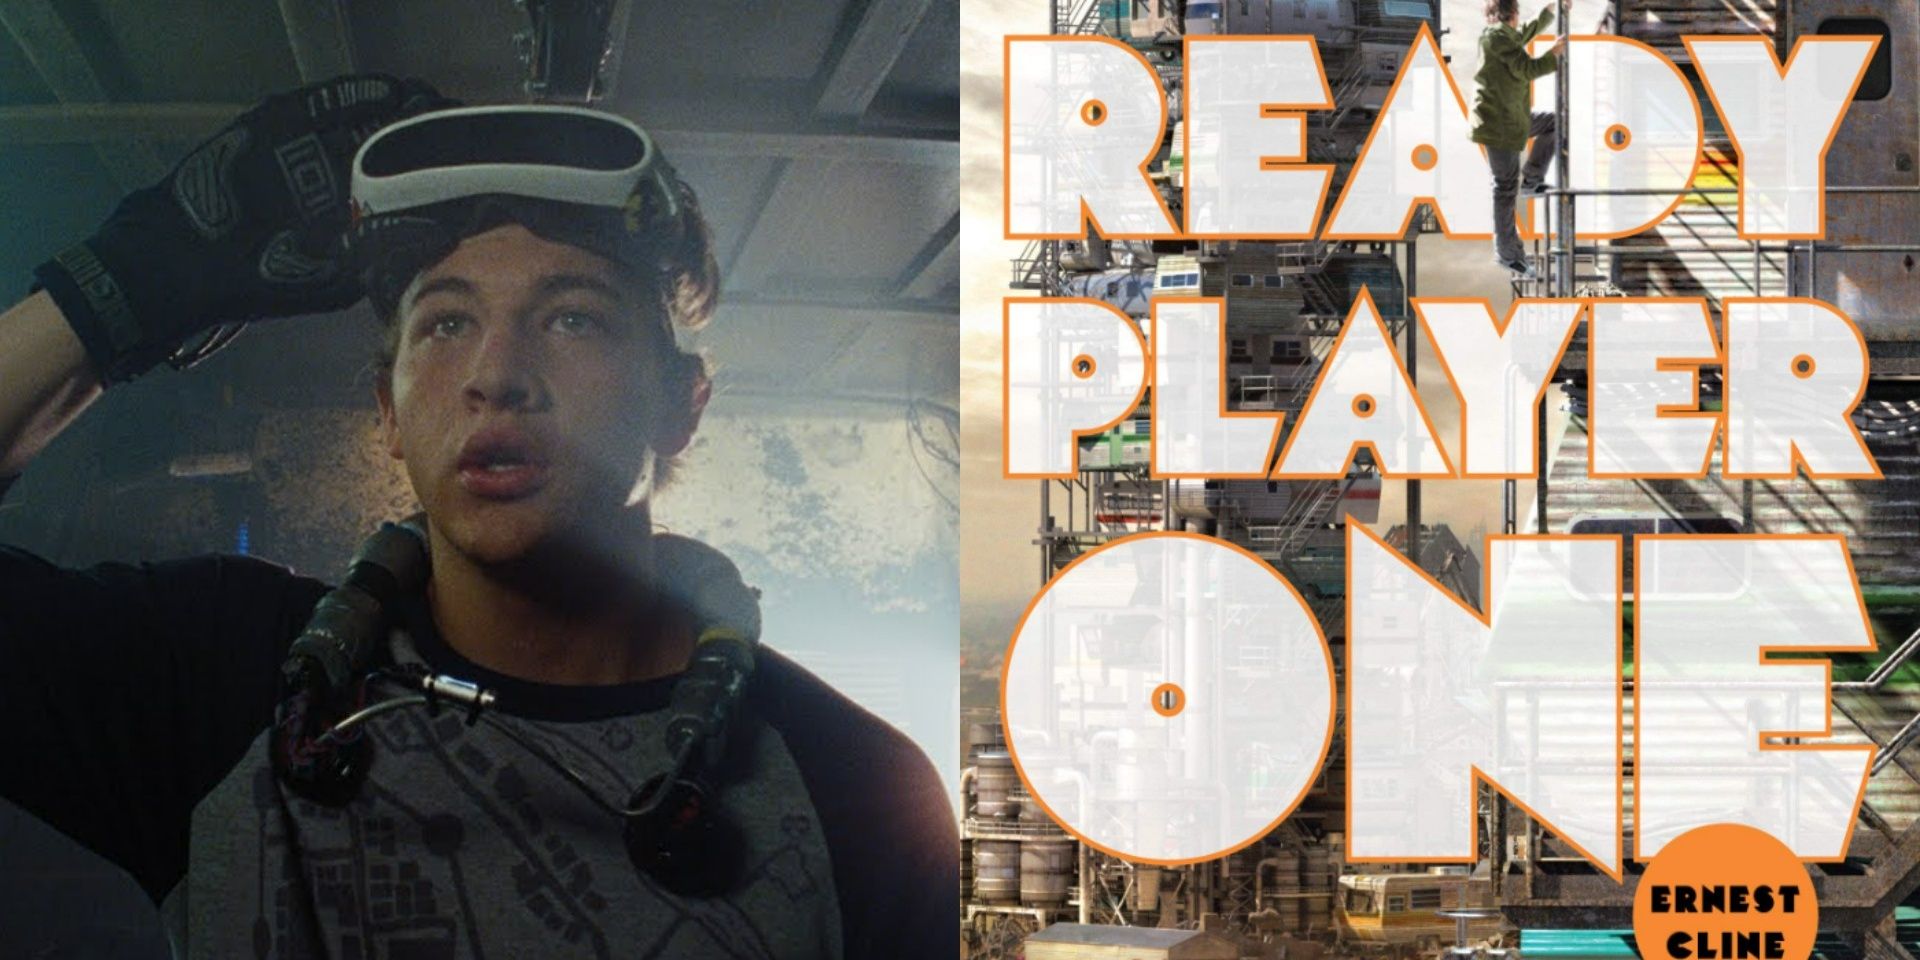 (Left) Boy taking off his VR gear / (Right) Ready Player One book cover with stacked trailers in background